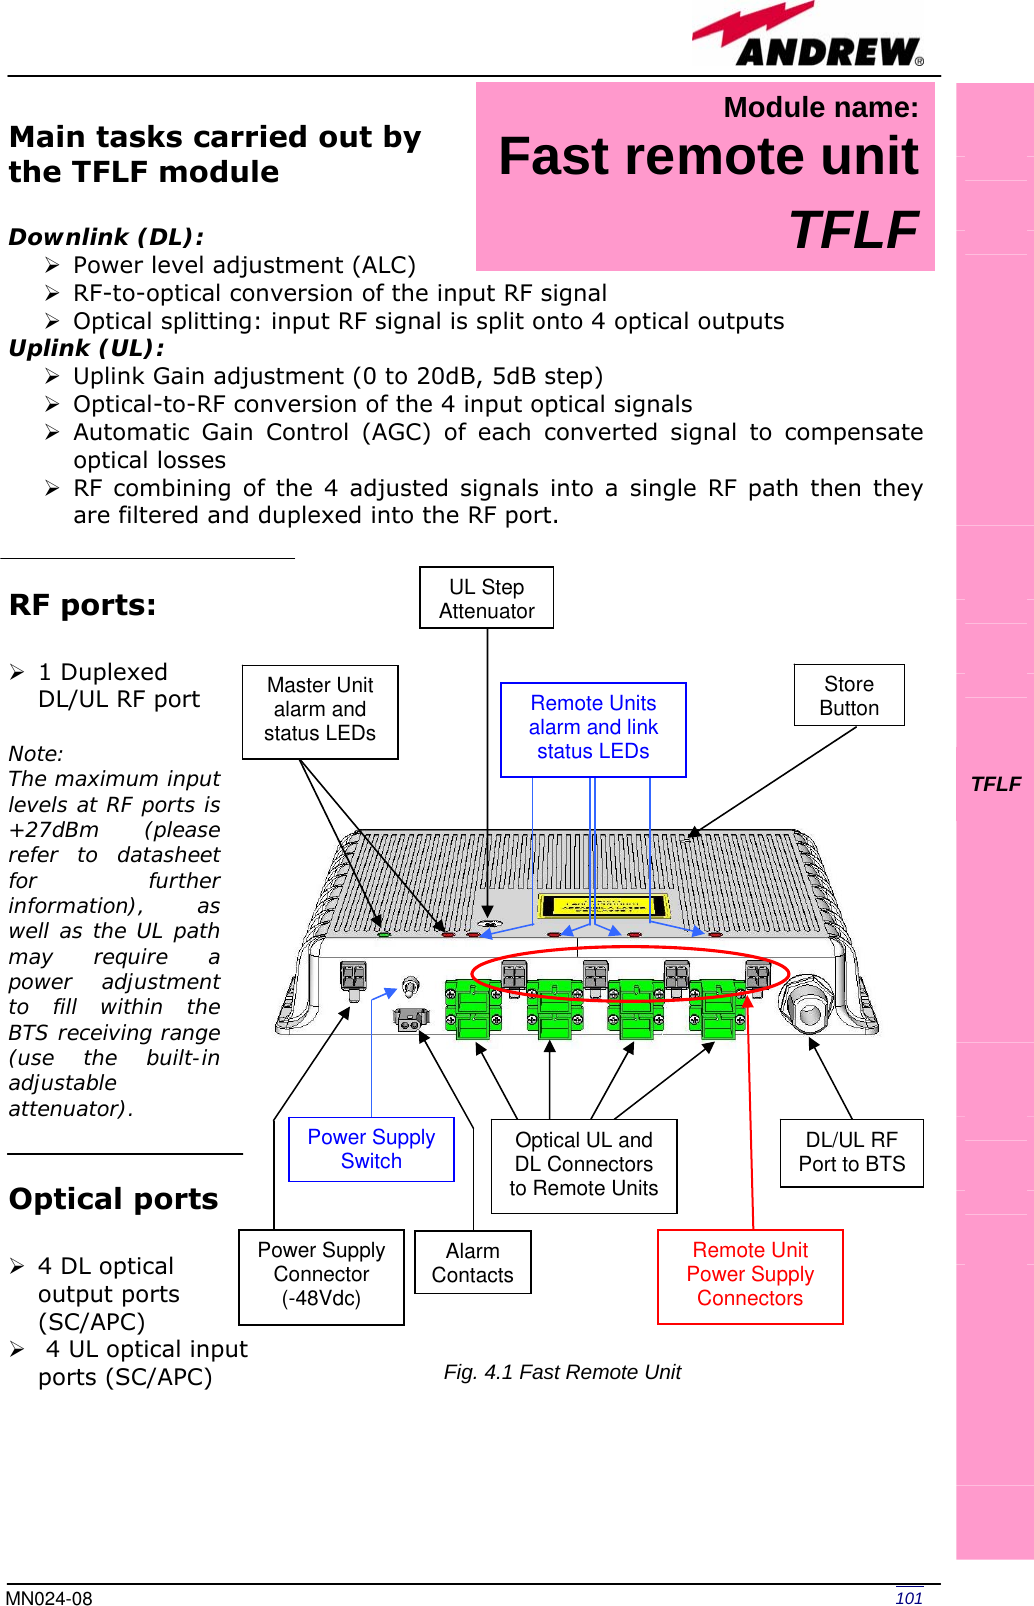   101MN024-08 Main tasks carried out by  the TFLF module  Downlink (DL):  ¾ Power level adjustment (ALC) ¾ RF-to-optical conversion of the input RF signal ¾ Optical splitting: input RF signal is split onto 4 optical outputs Uplink (UL): ¾ Uplink Gain adjustment (0 to 20dB, 5dB step) ¾ Optical-to-RF conversion of the 4 input optical signals ¾ Automatic Gain Control (AGC) of each converted signal to compensate optical losses ¾ RF combining of the 4 adjusted signals into a single RF path then they are filtered and duplexed into the RF port.    RF ports:  ¾ 1 Duplexed DL/UL RF port   Note:  The maximum input levels at RF ports is +27dBm (please refer to datasheet for further information), as well as the UL path may require a power adjustment to fill within the BTS receiving range (use the built-in adjustable attenuator).   Optical ports  ¾ 4 DL optical output ports (SC/APC) ¾  4 UL optical input ports (SC/APC)           TFLF           Power Supply SwitchPower Supply Connector  (-48Vdc) Alarm ContactsOptical UL and DL Connectors to Remote UnitsDL/UL RF Port to BTSRemote Unit Power Supply Connectors Master Unit alarm and status LEDsUL Step AttenuatorStore ButtonRemote Units alarm and link status LEDs Fig. 4.1 Fast Remote Unit Module name: Fast remote unit TFLF 